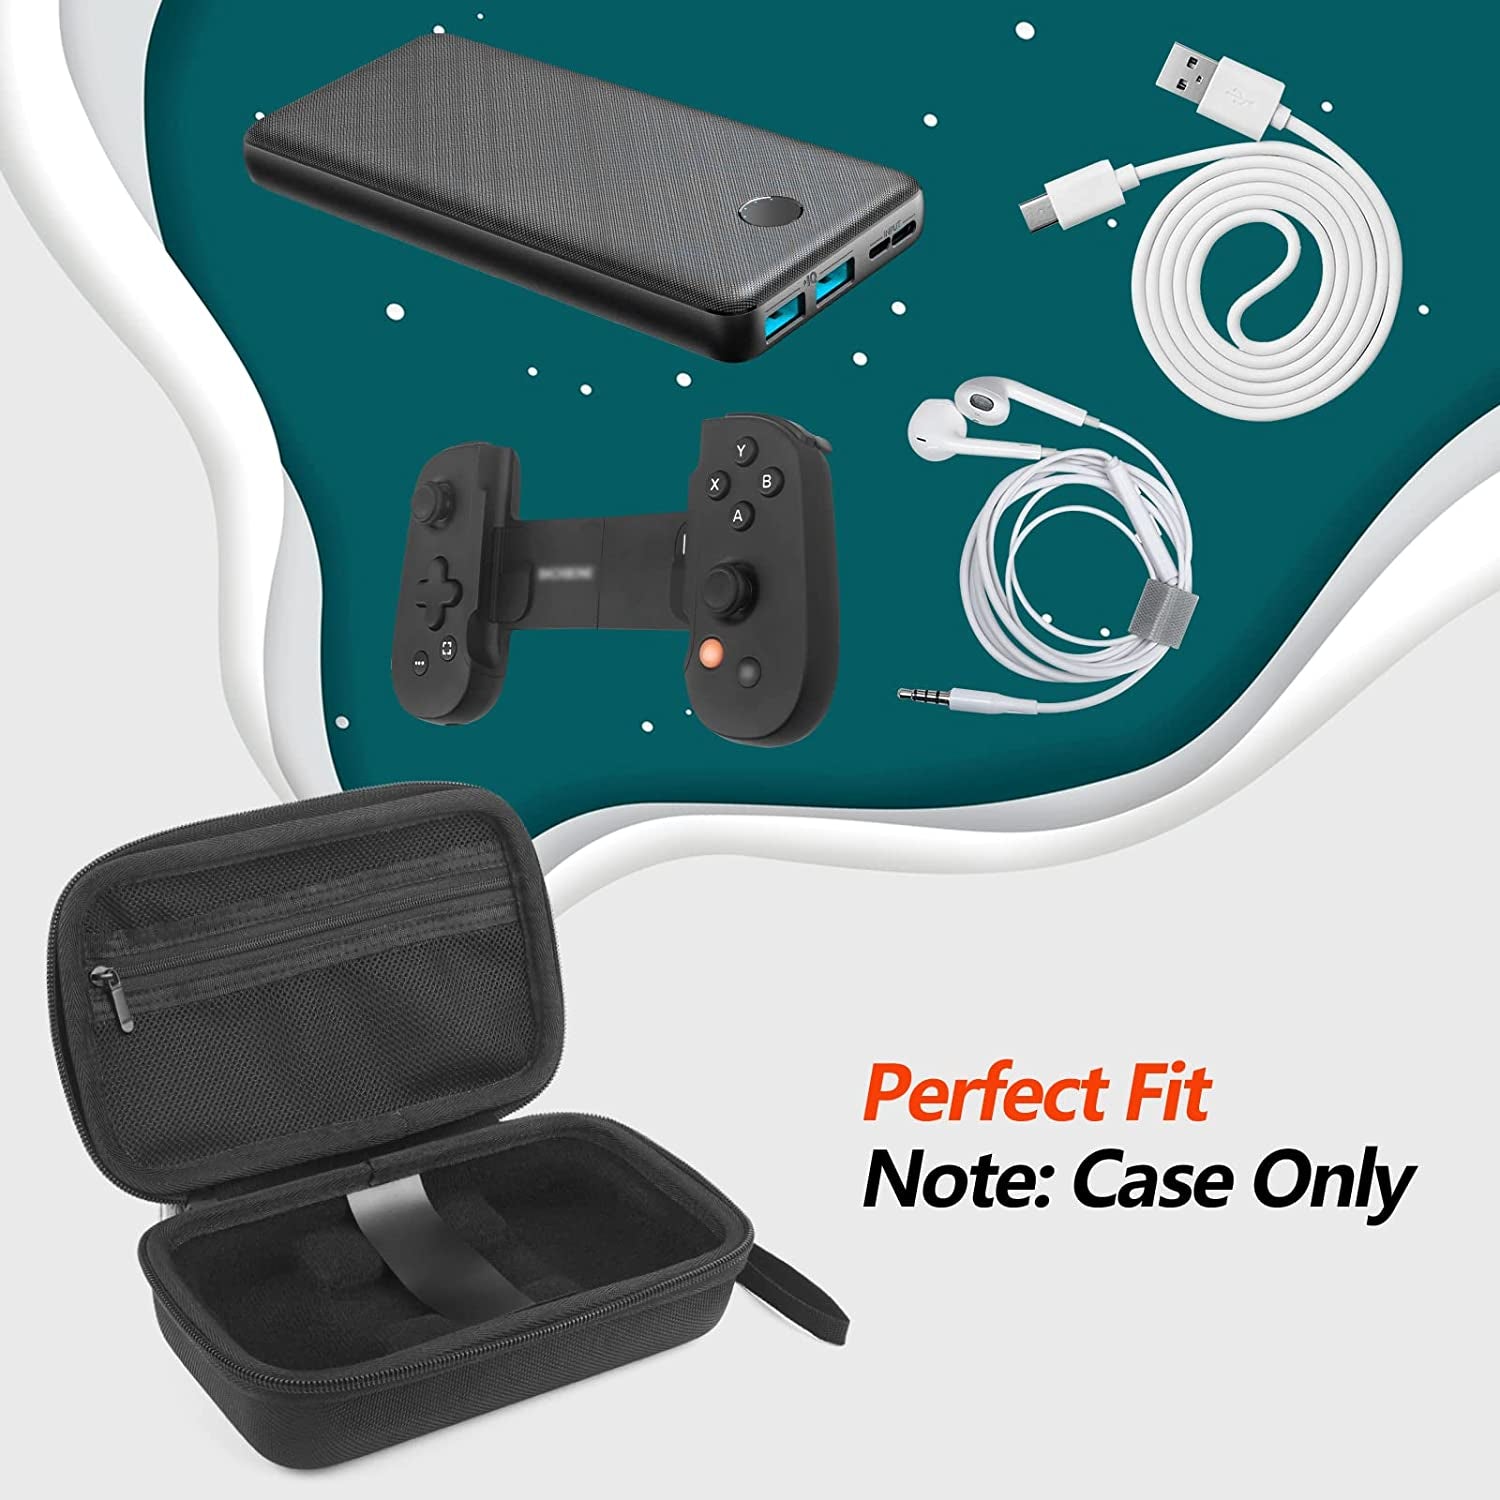 Hard Case for Backbone One Mobile Gaming Controller[Shockproof] Carrying Case for Backbone One with Wristband,Keychain and Net Pocket for Accessories(Case Only)